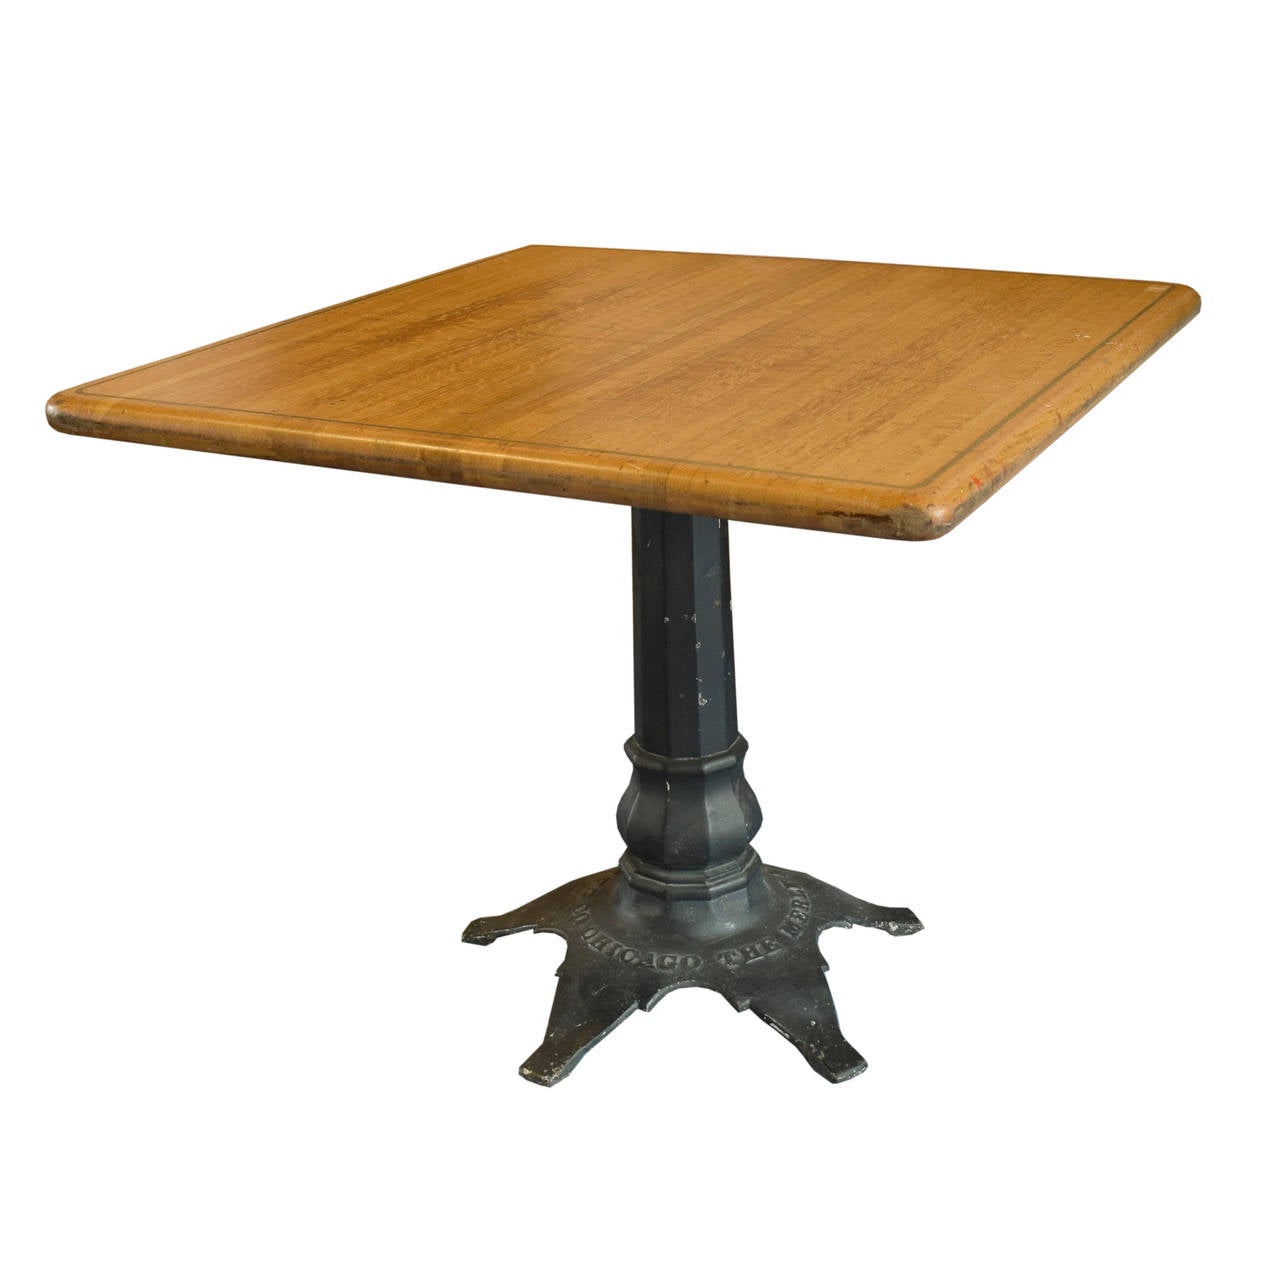 American wood table top with a brass inlay border. The 